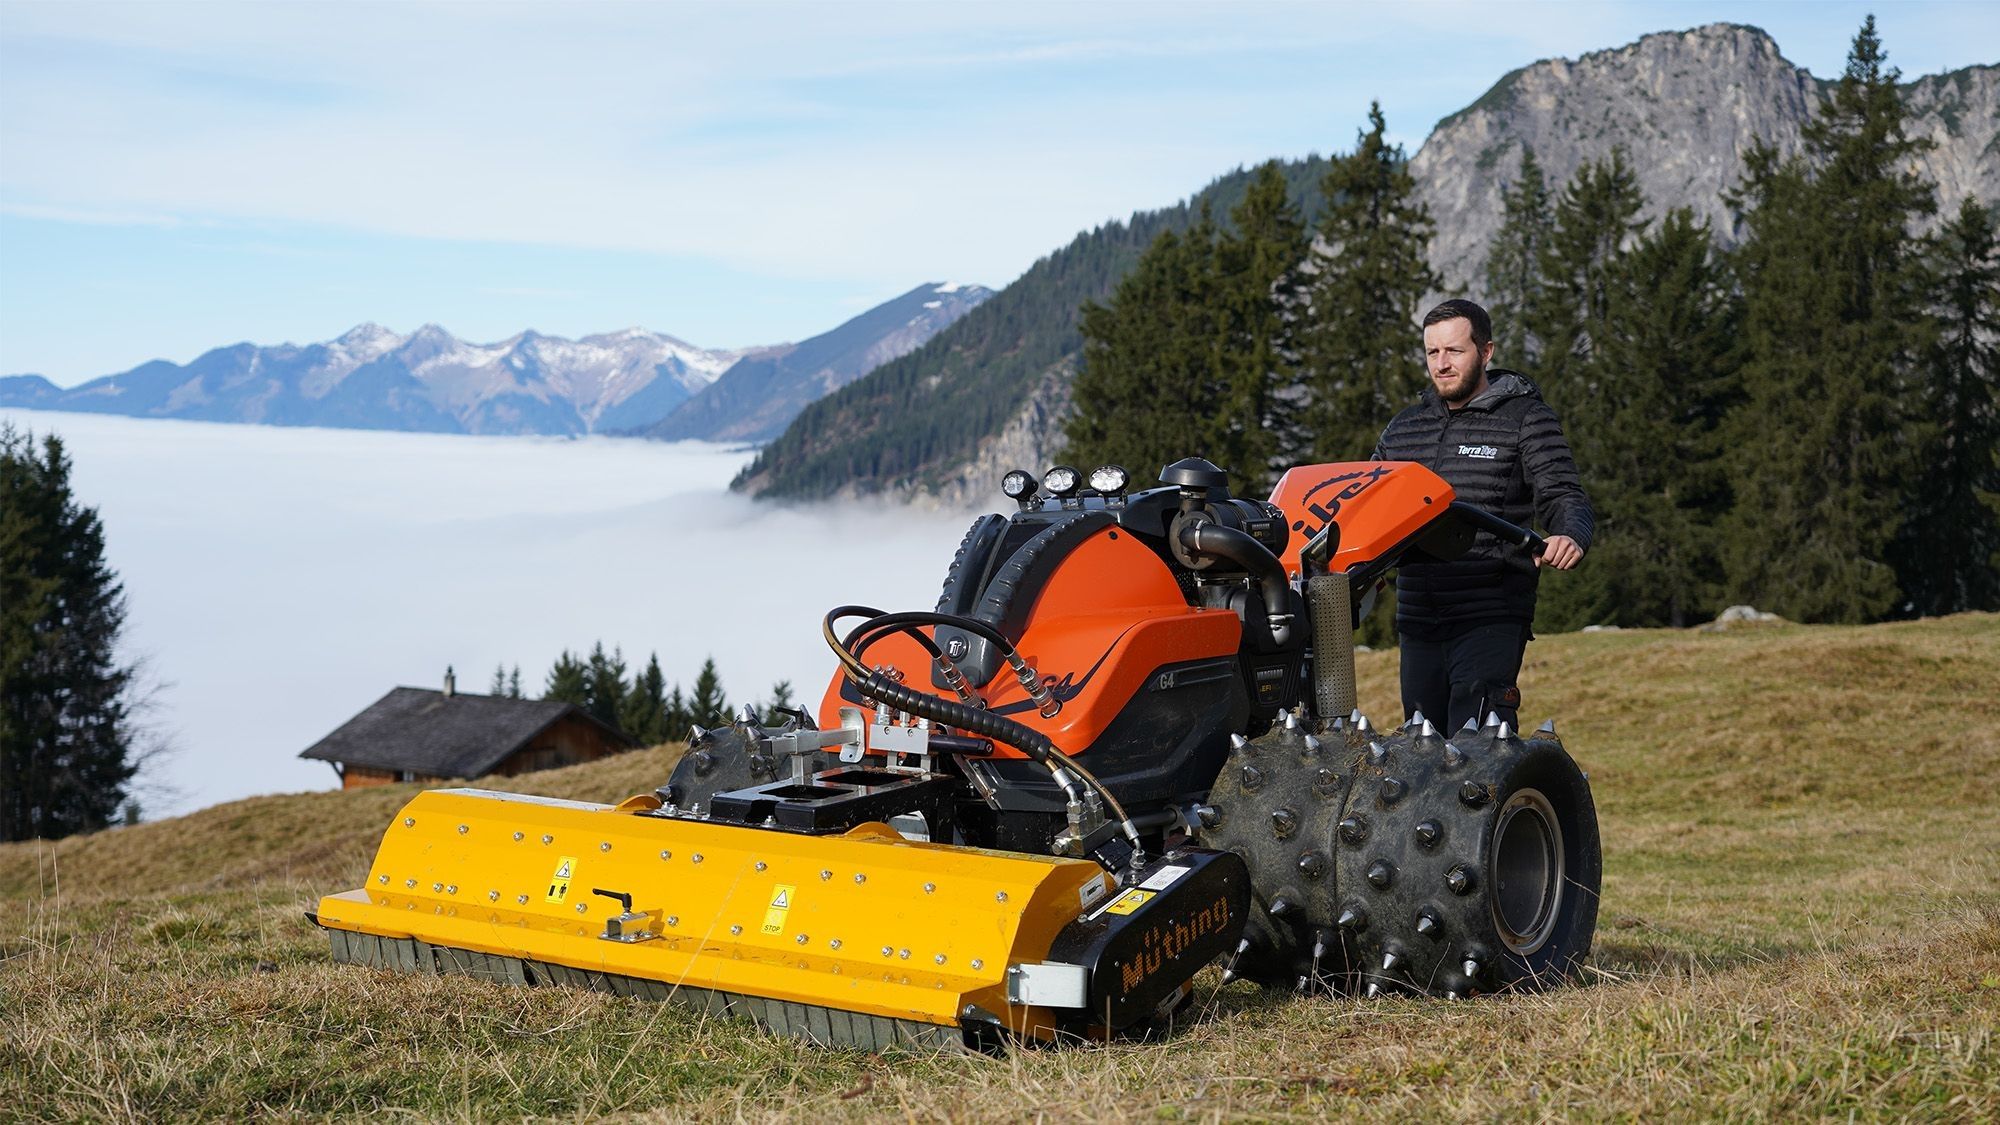 Ibex G4 is operated on a mountain.